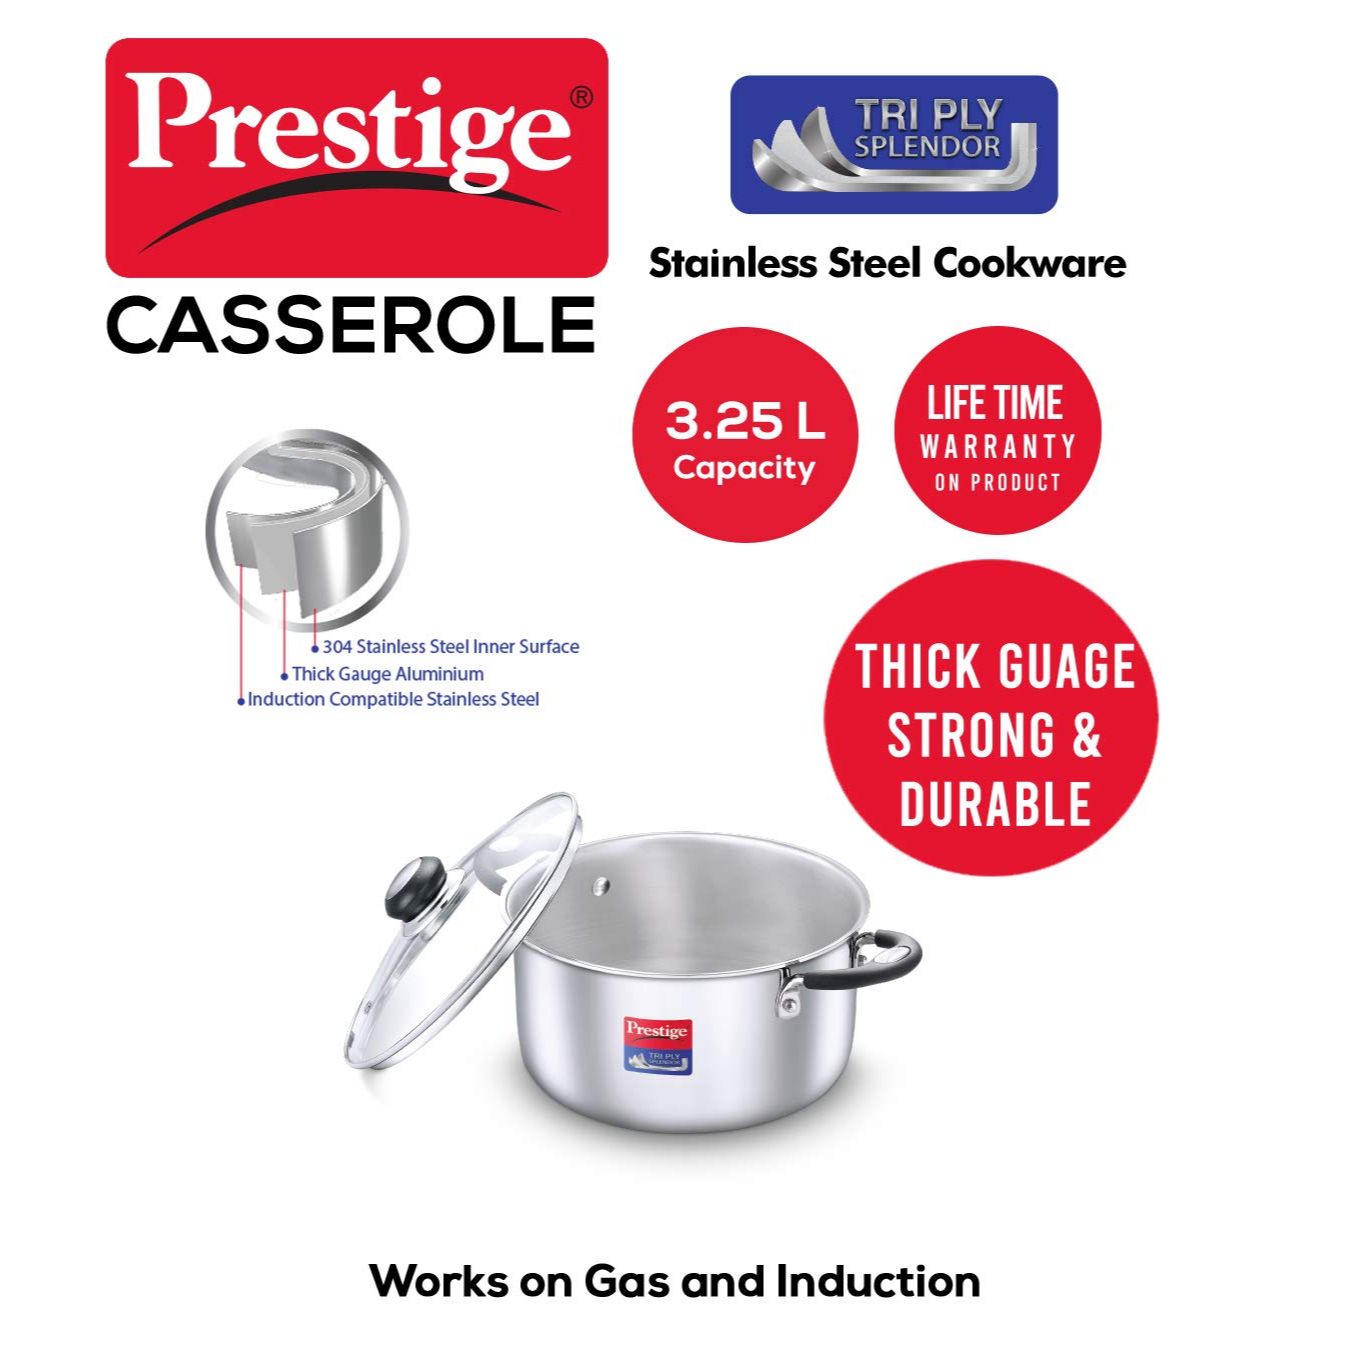 Prestige Tri Ply Splendor Stainless Steel Gas and Induction Compatible Casserole with Glass Lid